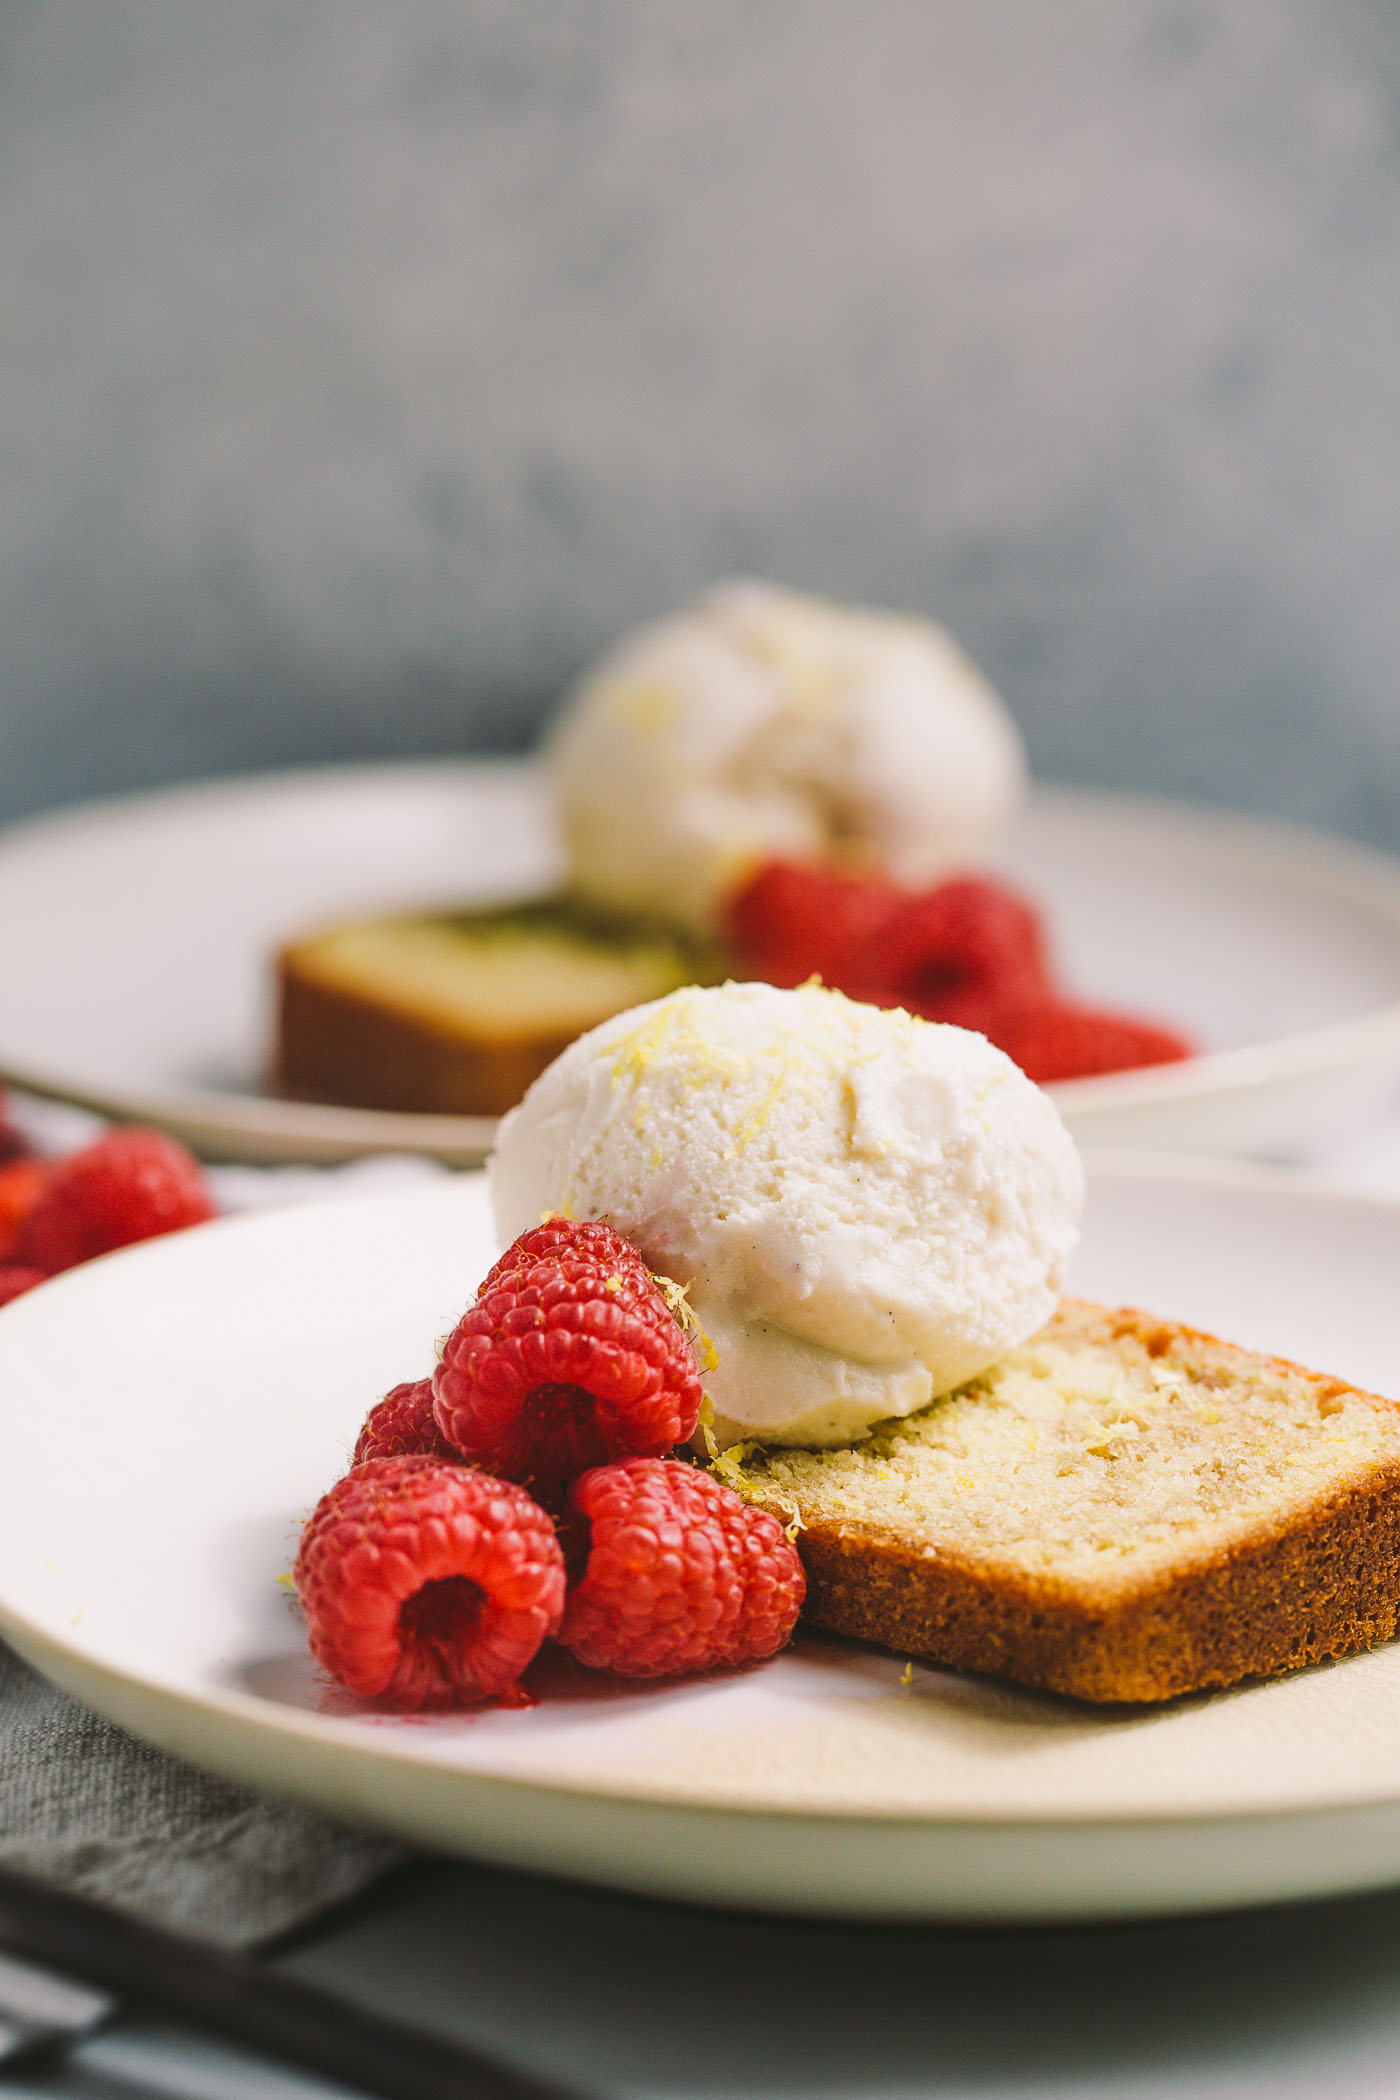 a lemon pound cake swirled with the vibrant flavor of fresh raspberries. topped with a scoop of vanilla bean ice cream, raspberry swirl lemon pound cake is the perfect understated, yet elegant, dessert for summer entertaining.